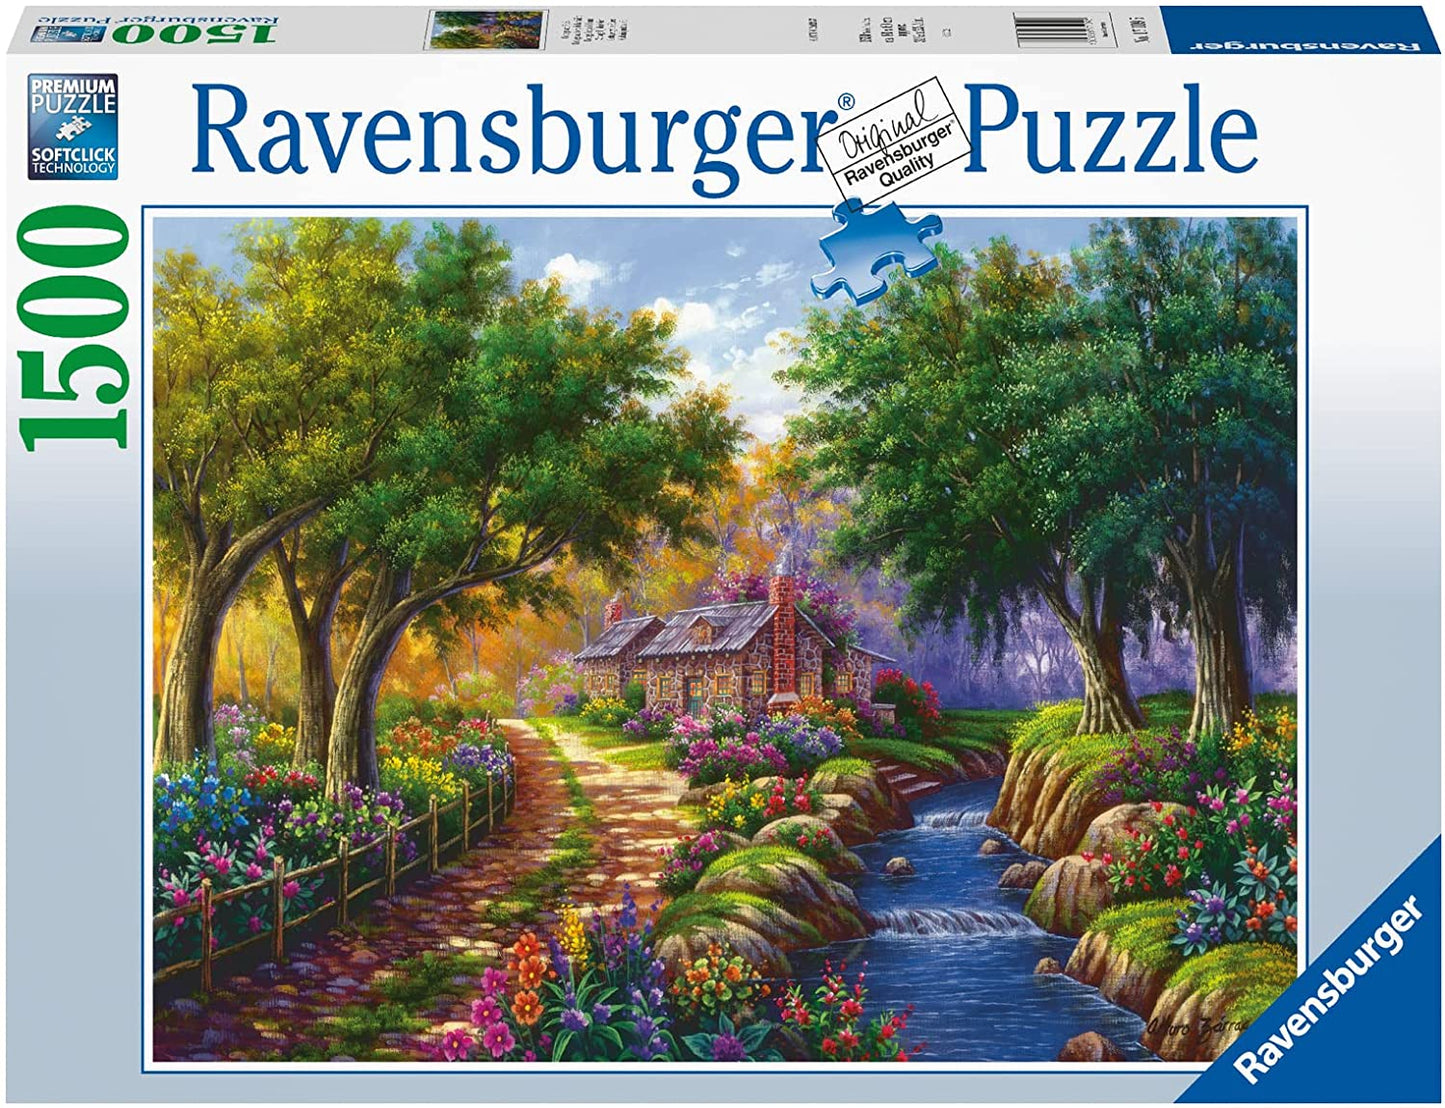 Ravensburger - Cottage by the River - 1500 Piece Jigsaw Puzzle